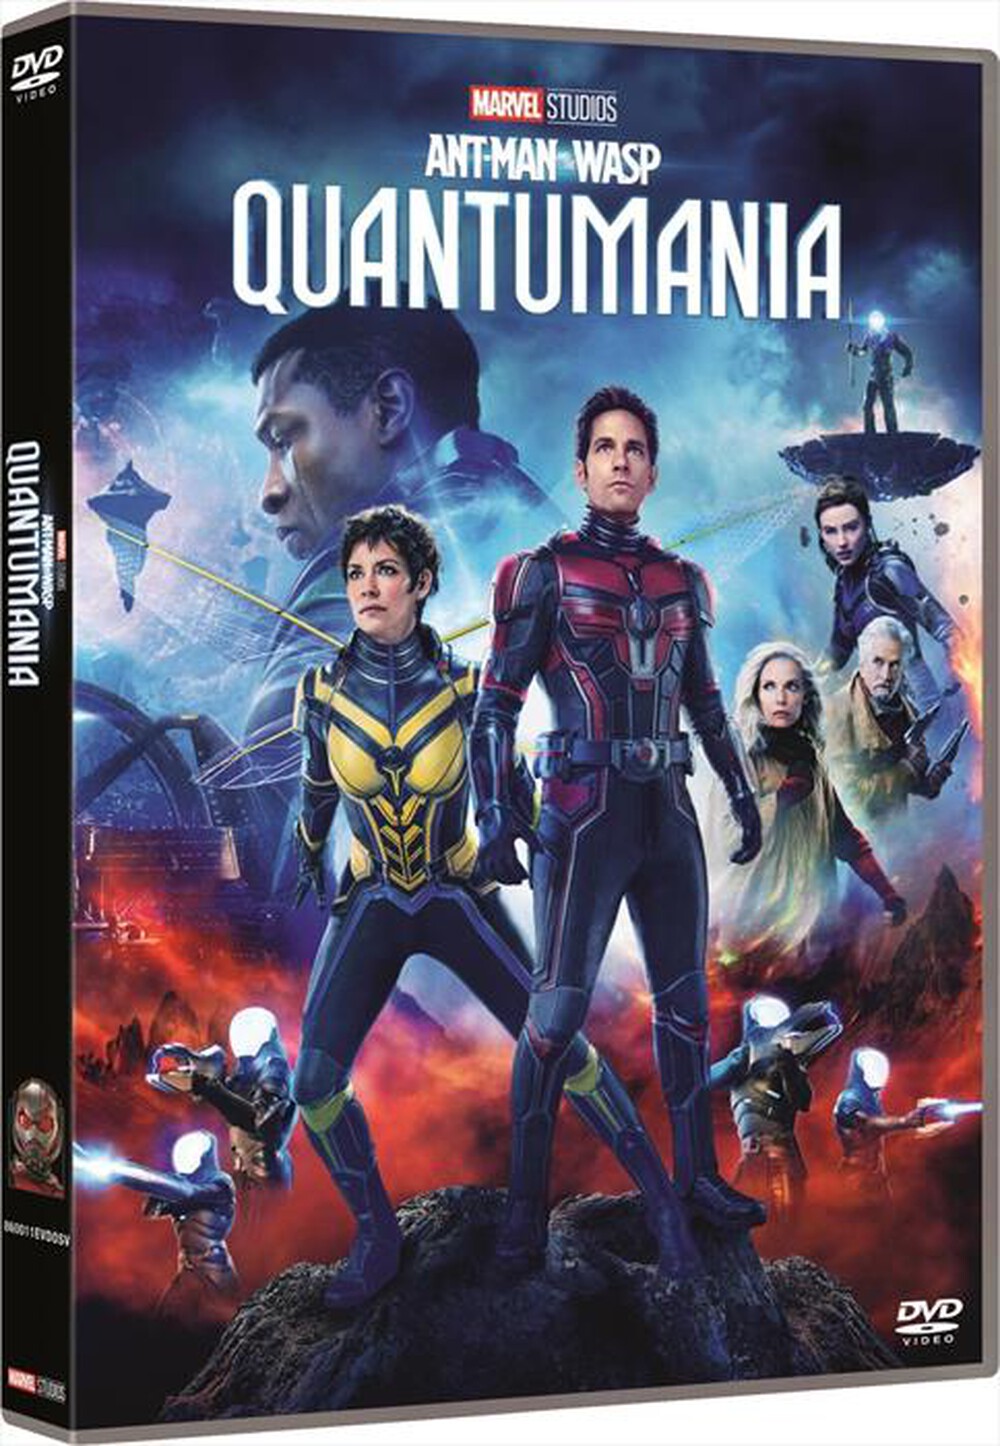 "MARVEL - Ant-Man And The Wasp: Quantumania (Dvd+Card)"